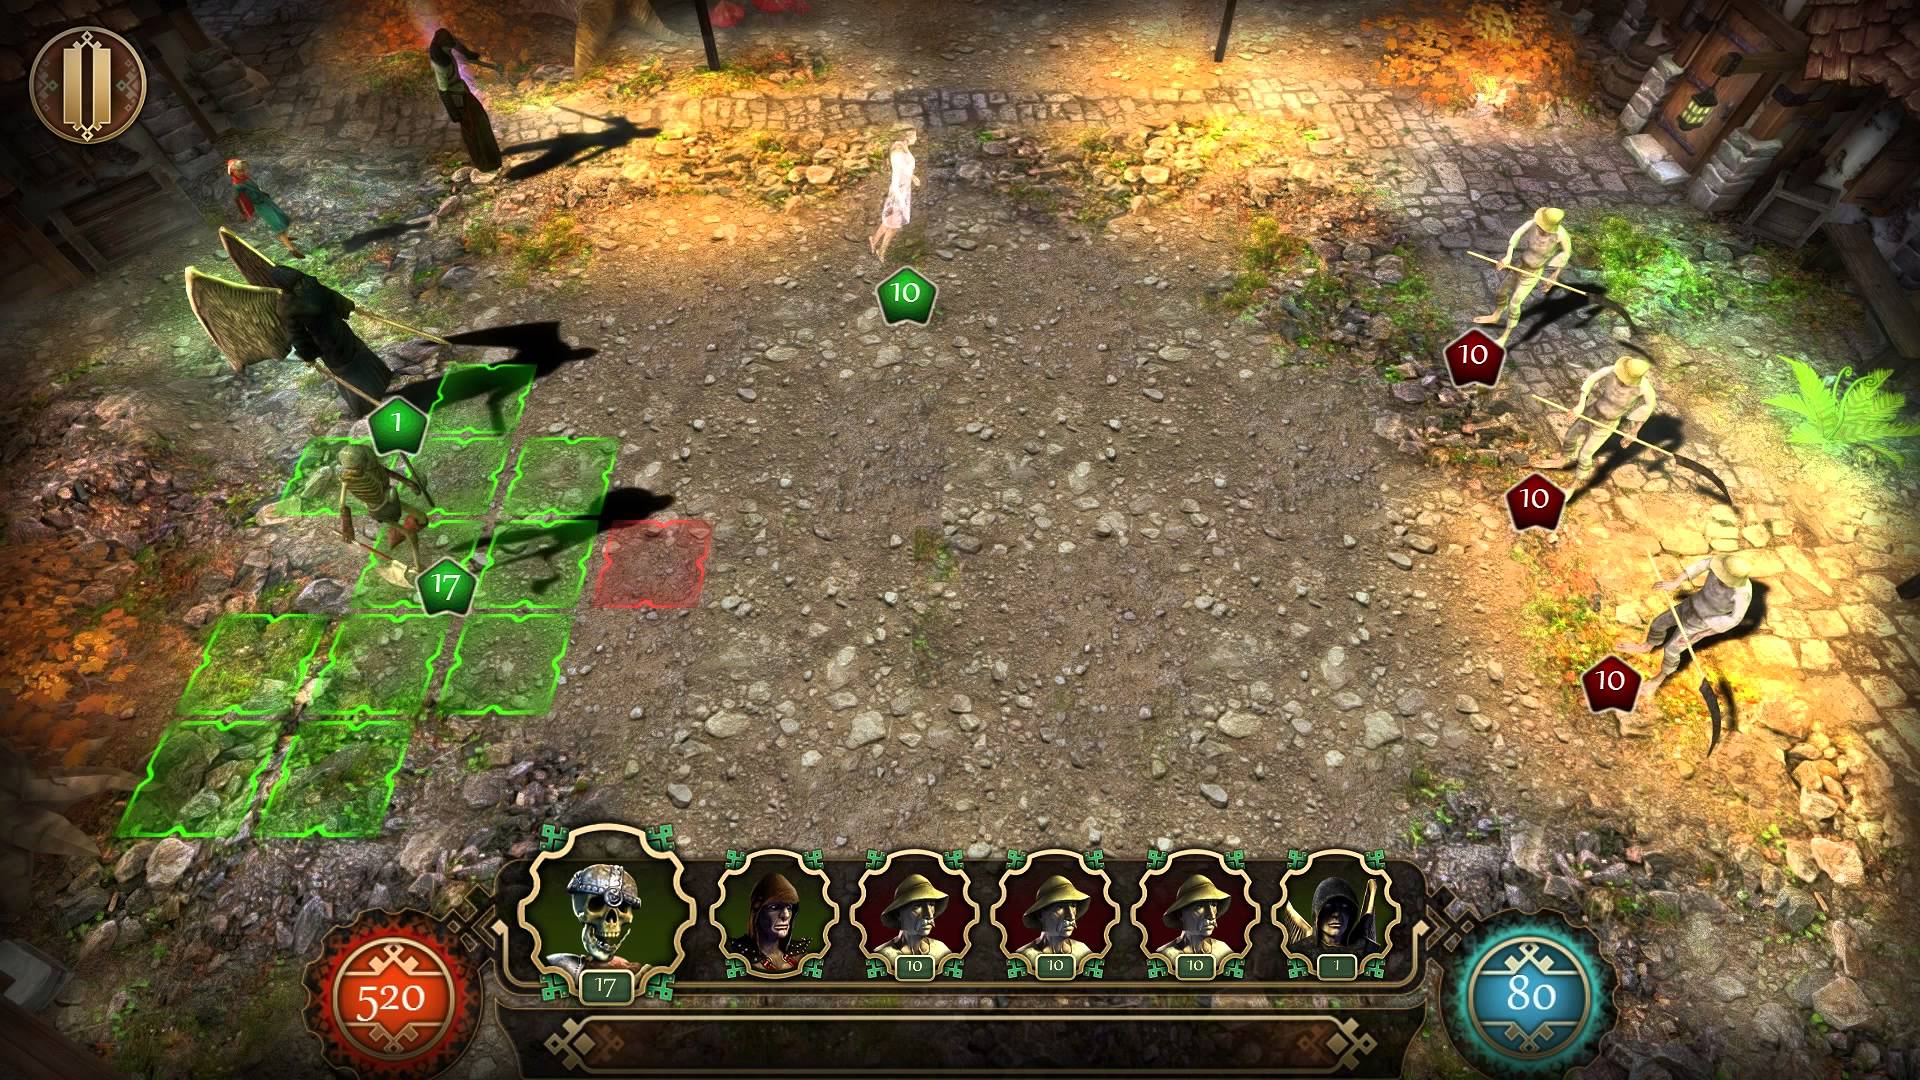 Spellcrafter Turn Based Tactical Rpg Game From Jujubee Now Available On Pc And Android